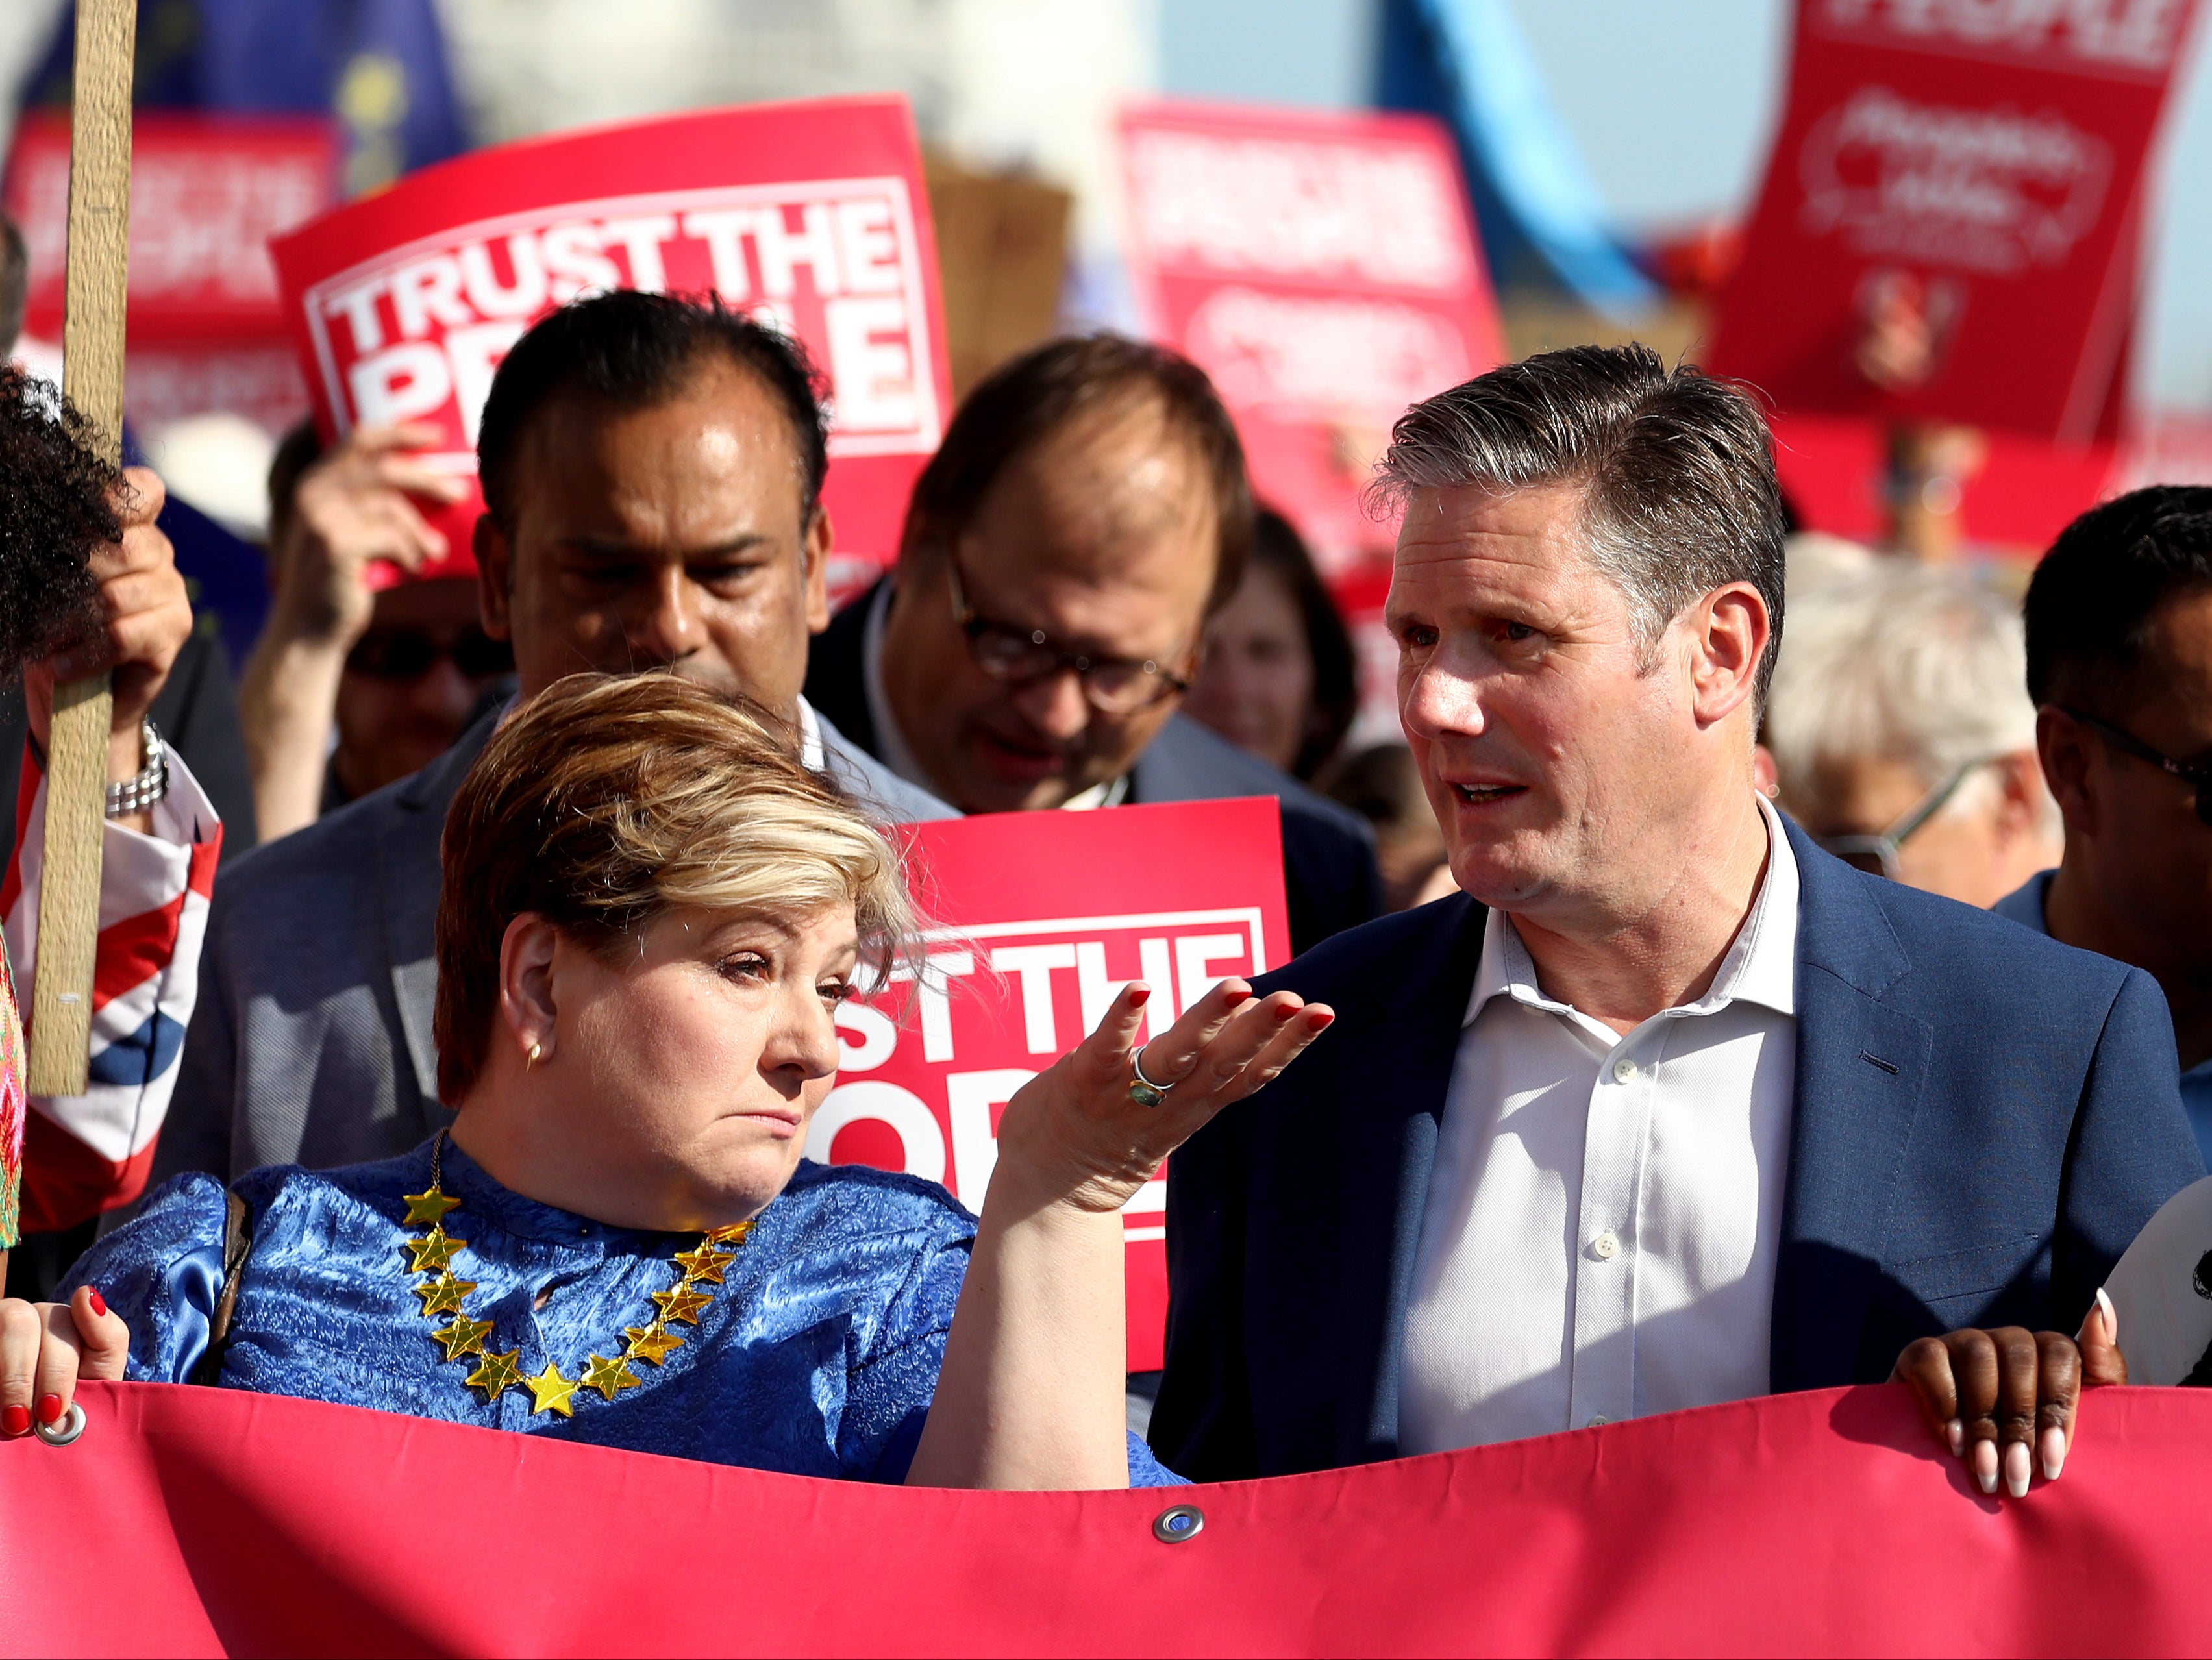 Keir Starmer at an anti-Brexit rally in 2019